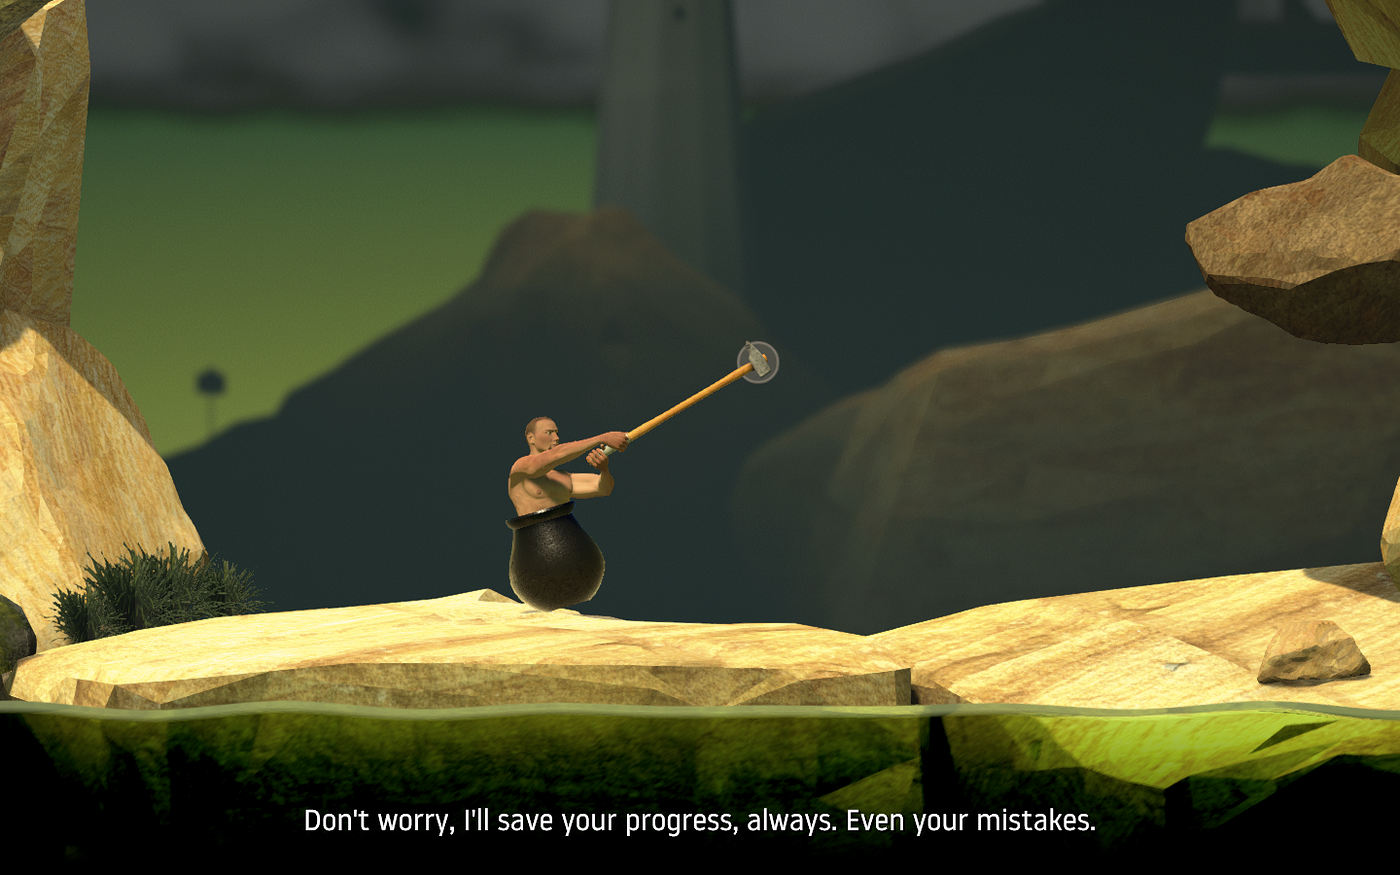 Find out the true meaning of frustration in the utterly pitiless Getting Over  It with Bennett Foddy, by Andy Humphreys